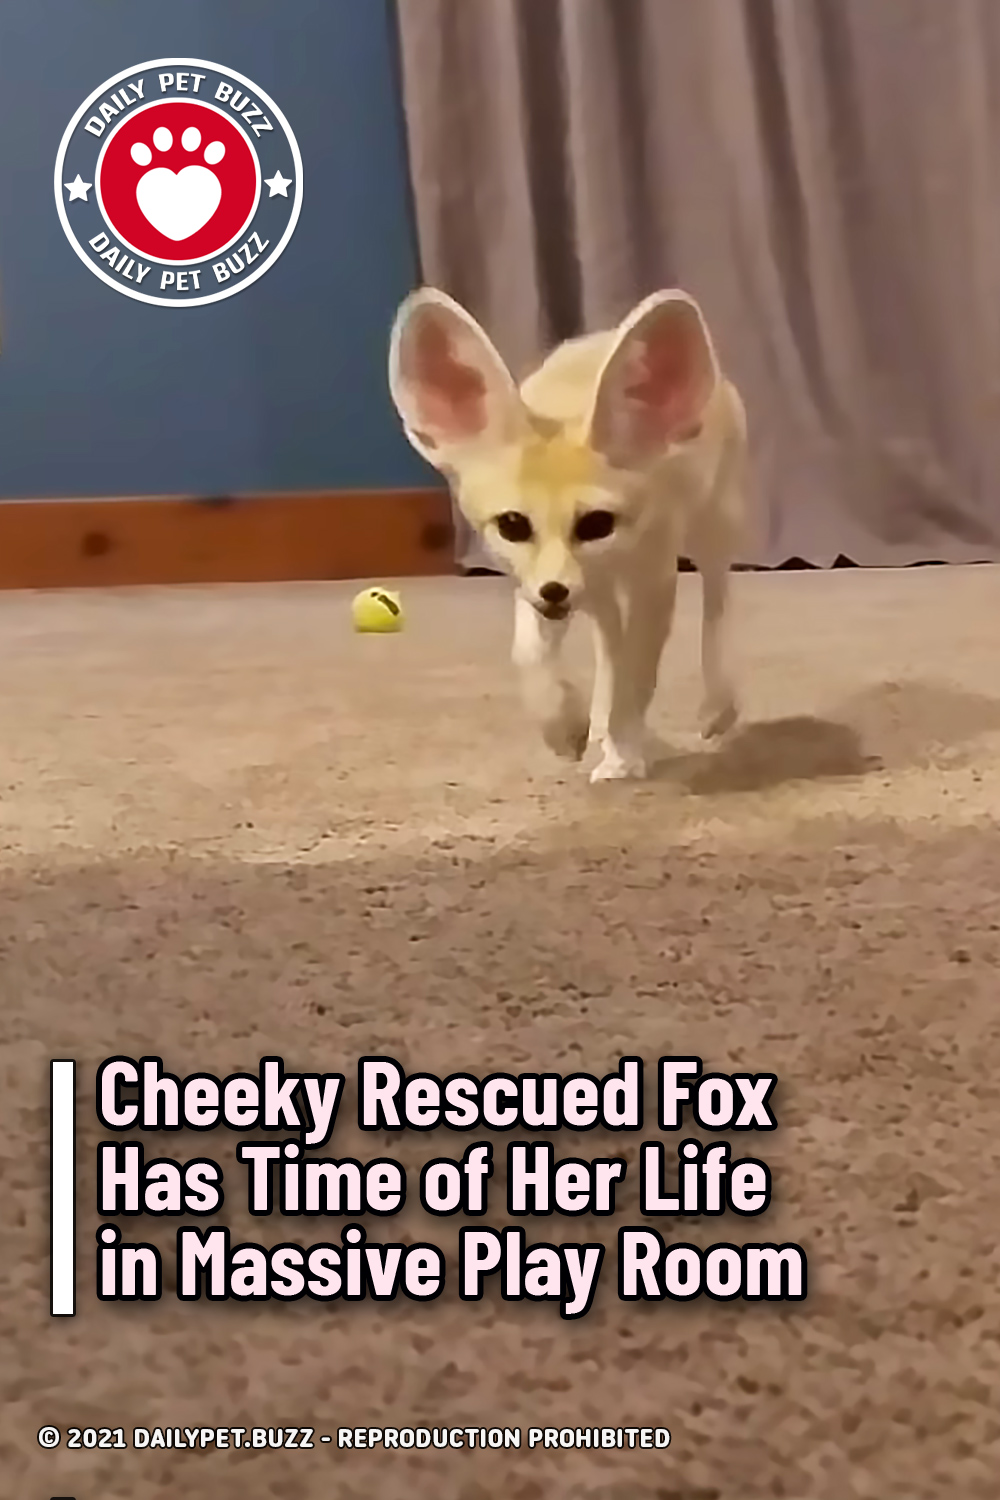 Cheeky Rescued Fox Has Time of Her Life in Massive Play Room